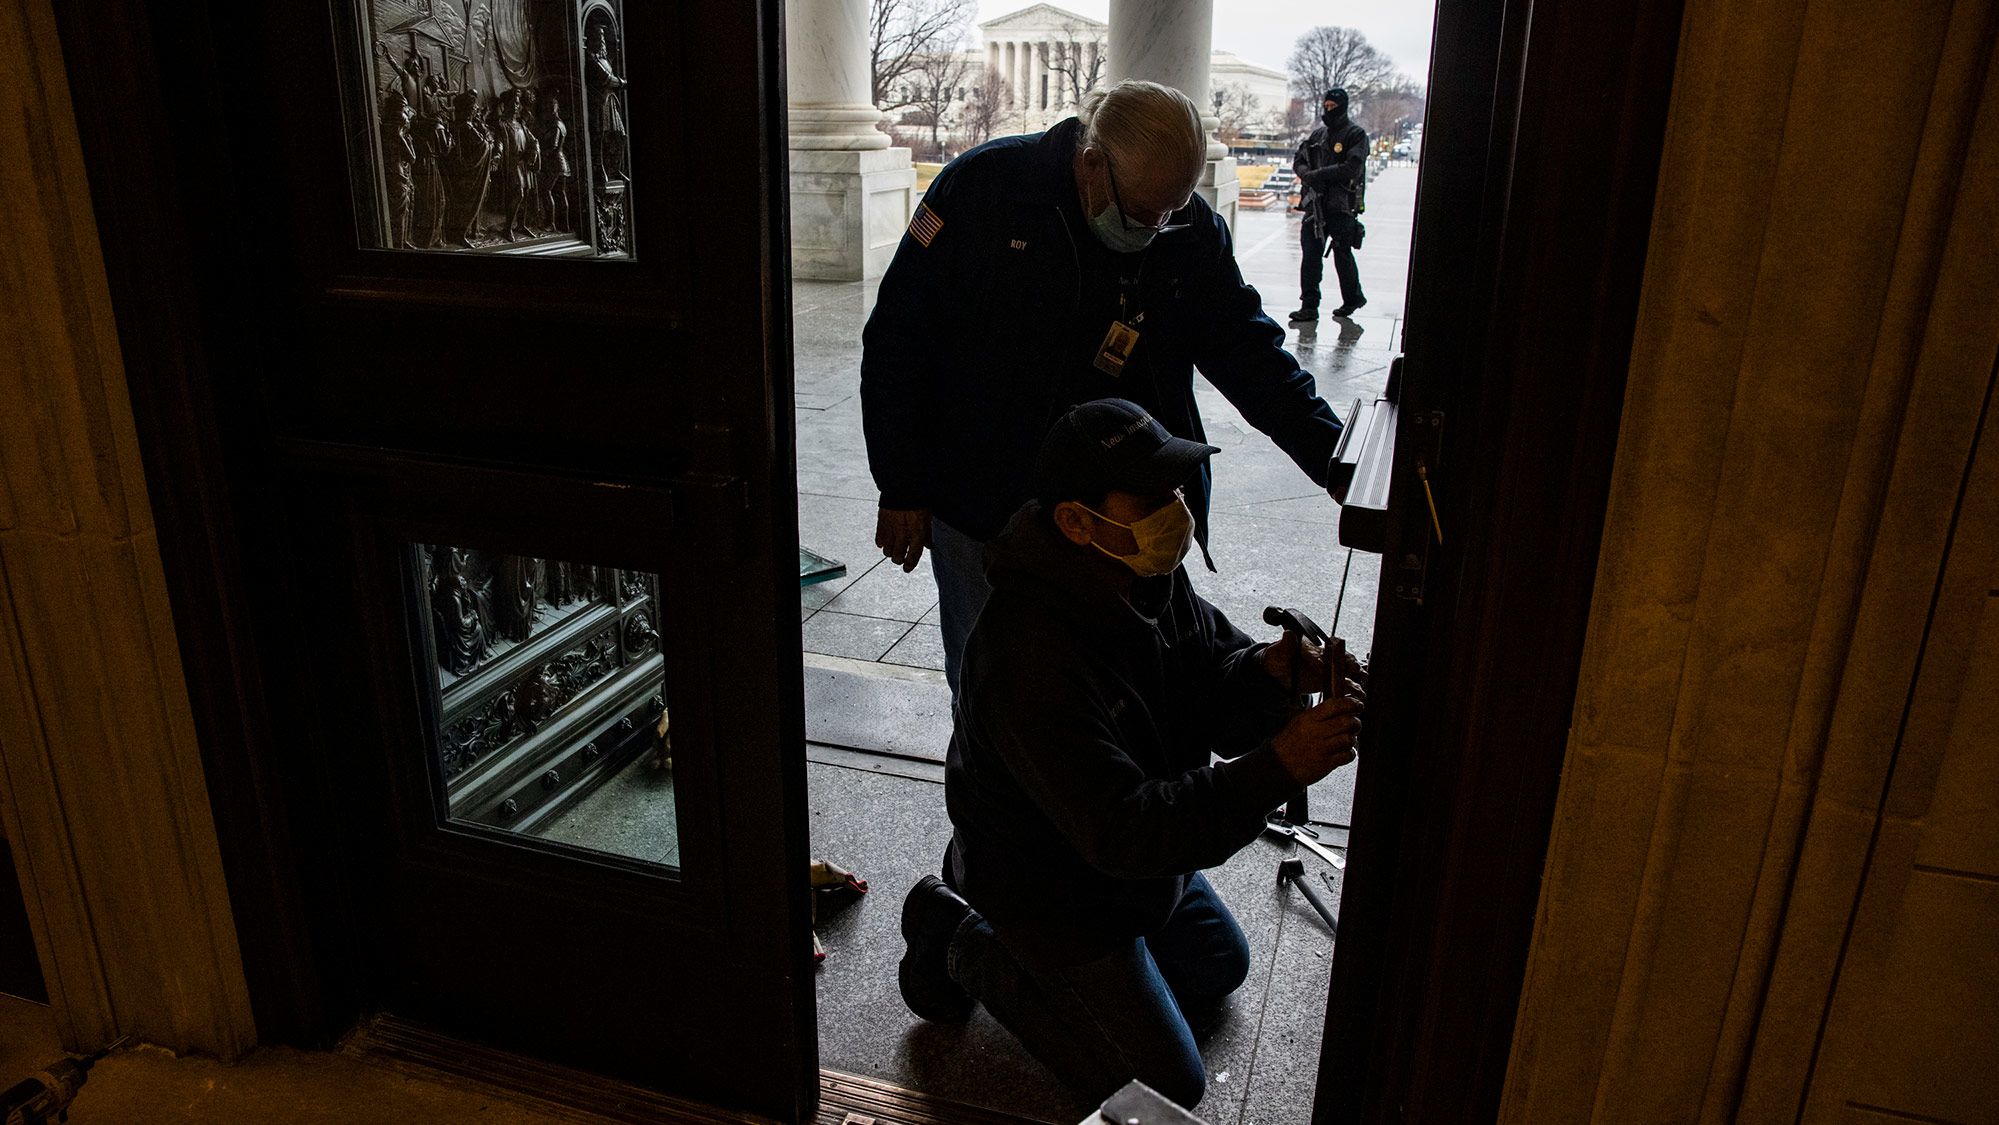 Workers replace window panes on Capitol doors that were damaged in last month's riot.